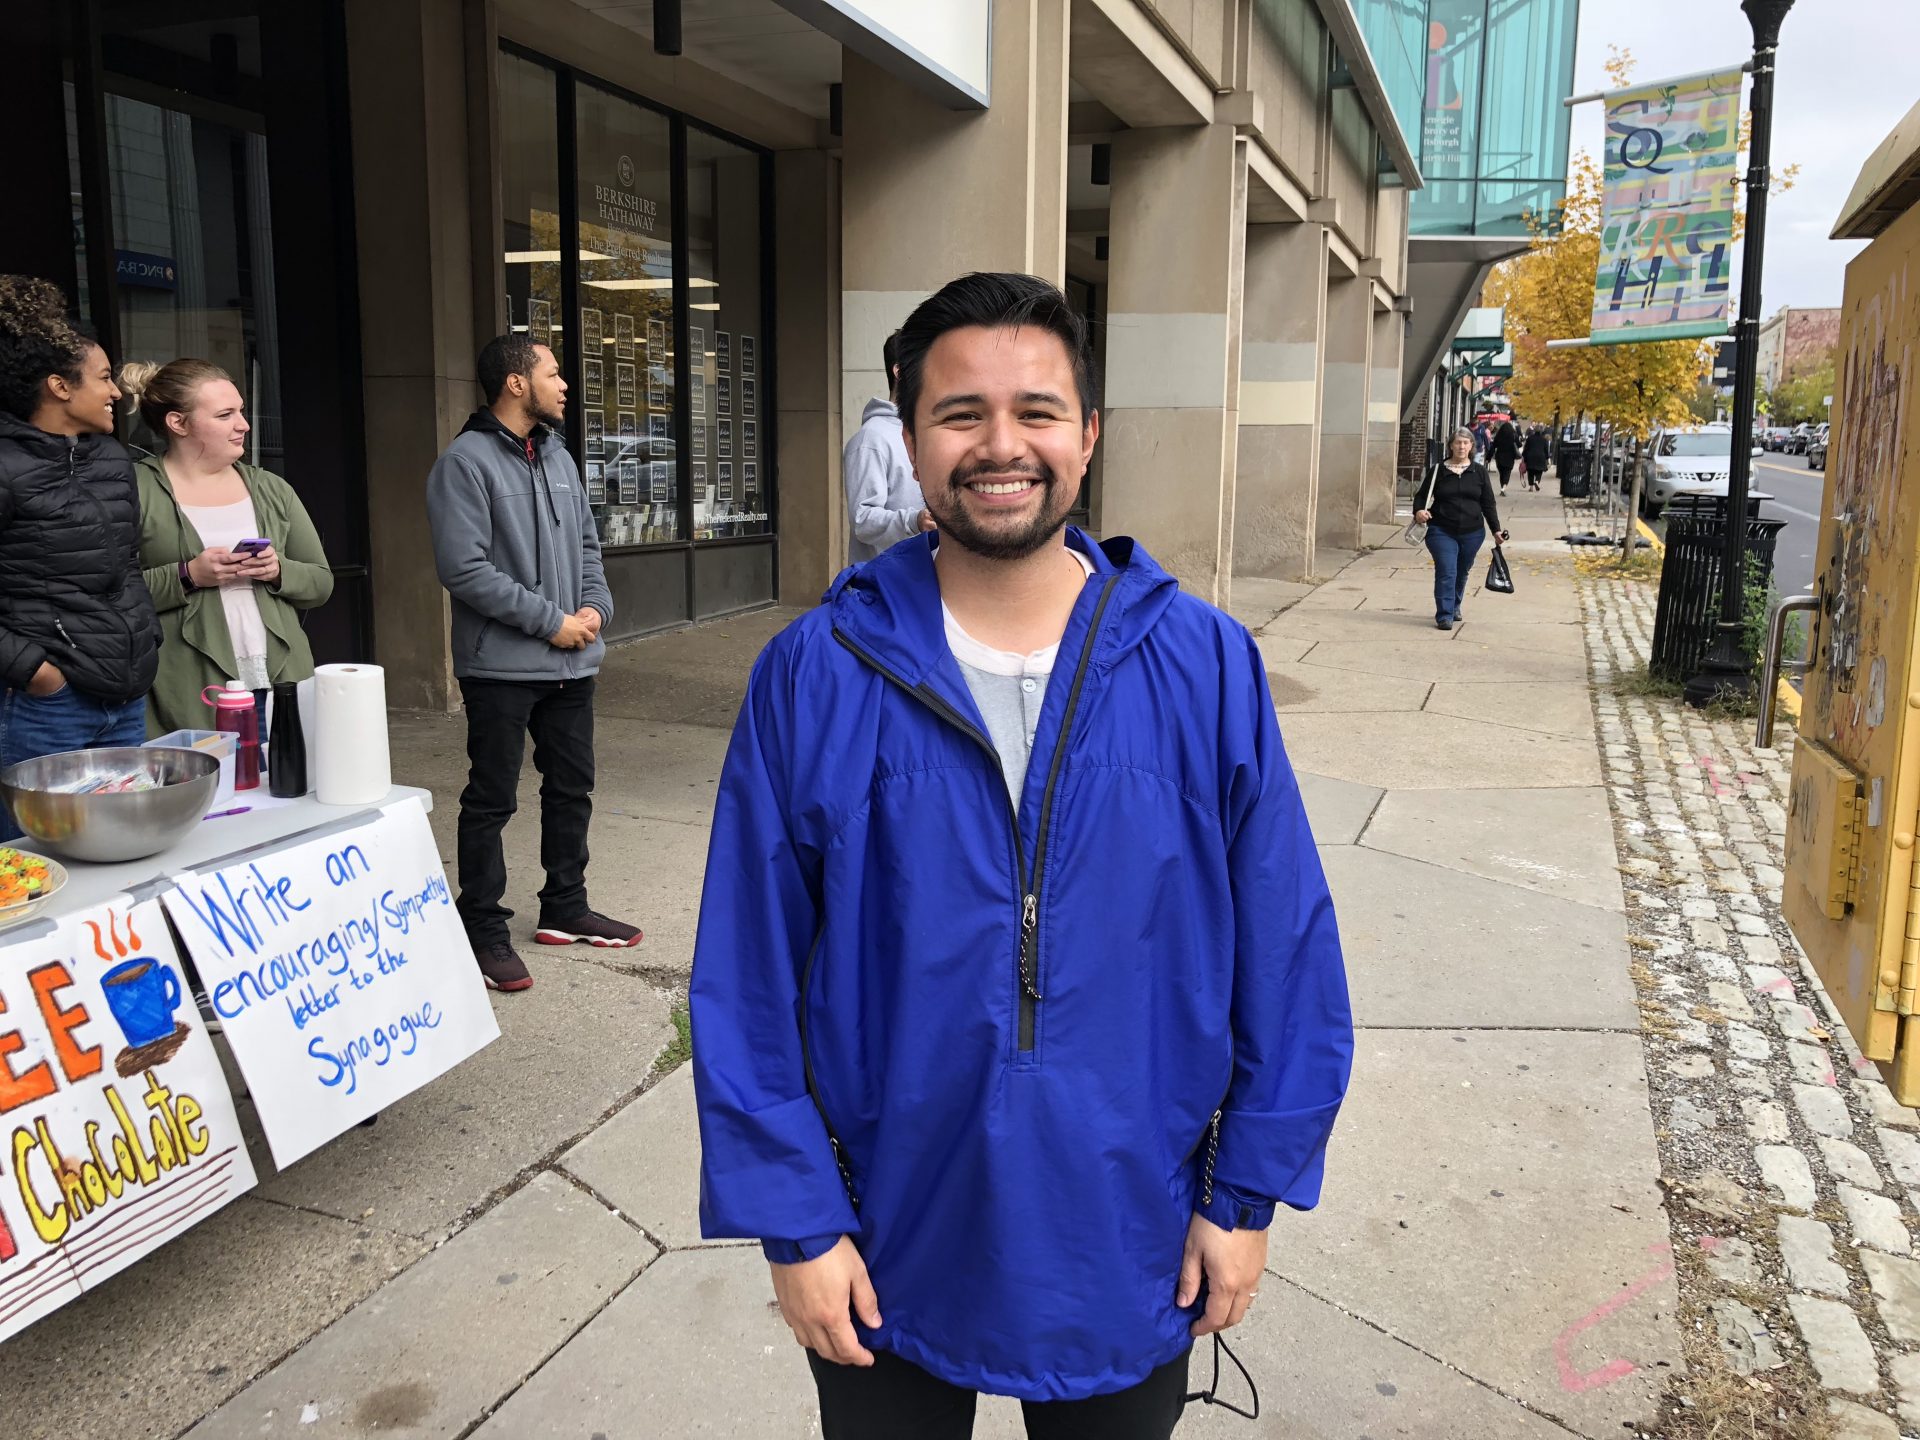 Diego Colmenares grew up in Colombia and moved to Pittsburgh about 10 years ago. He and others with Youth With A Mission offered free hot chocolate and snacks to people in Squirrel Hill on Thursday Nov. 1, 2018